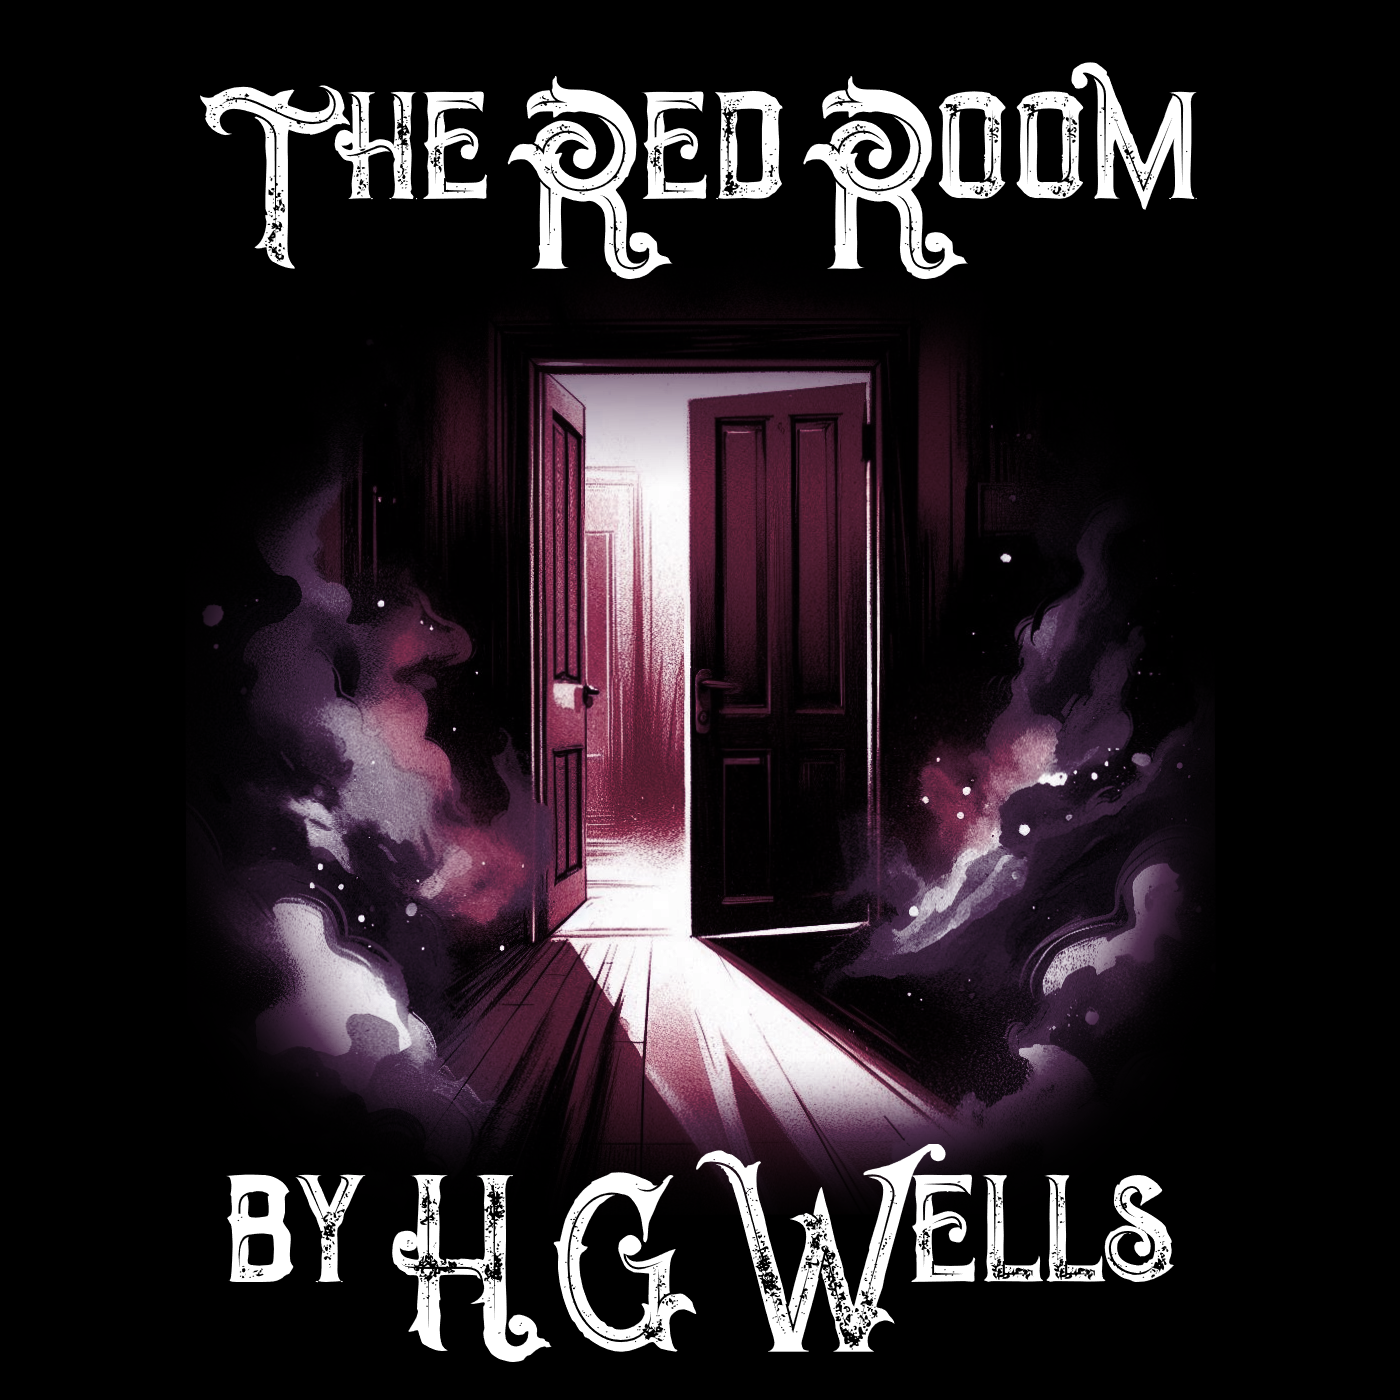 The Red Room, by H. G. Wells